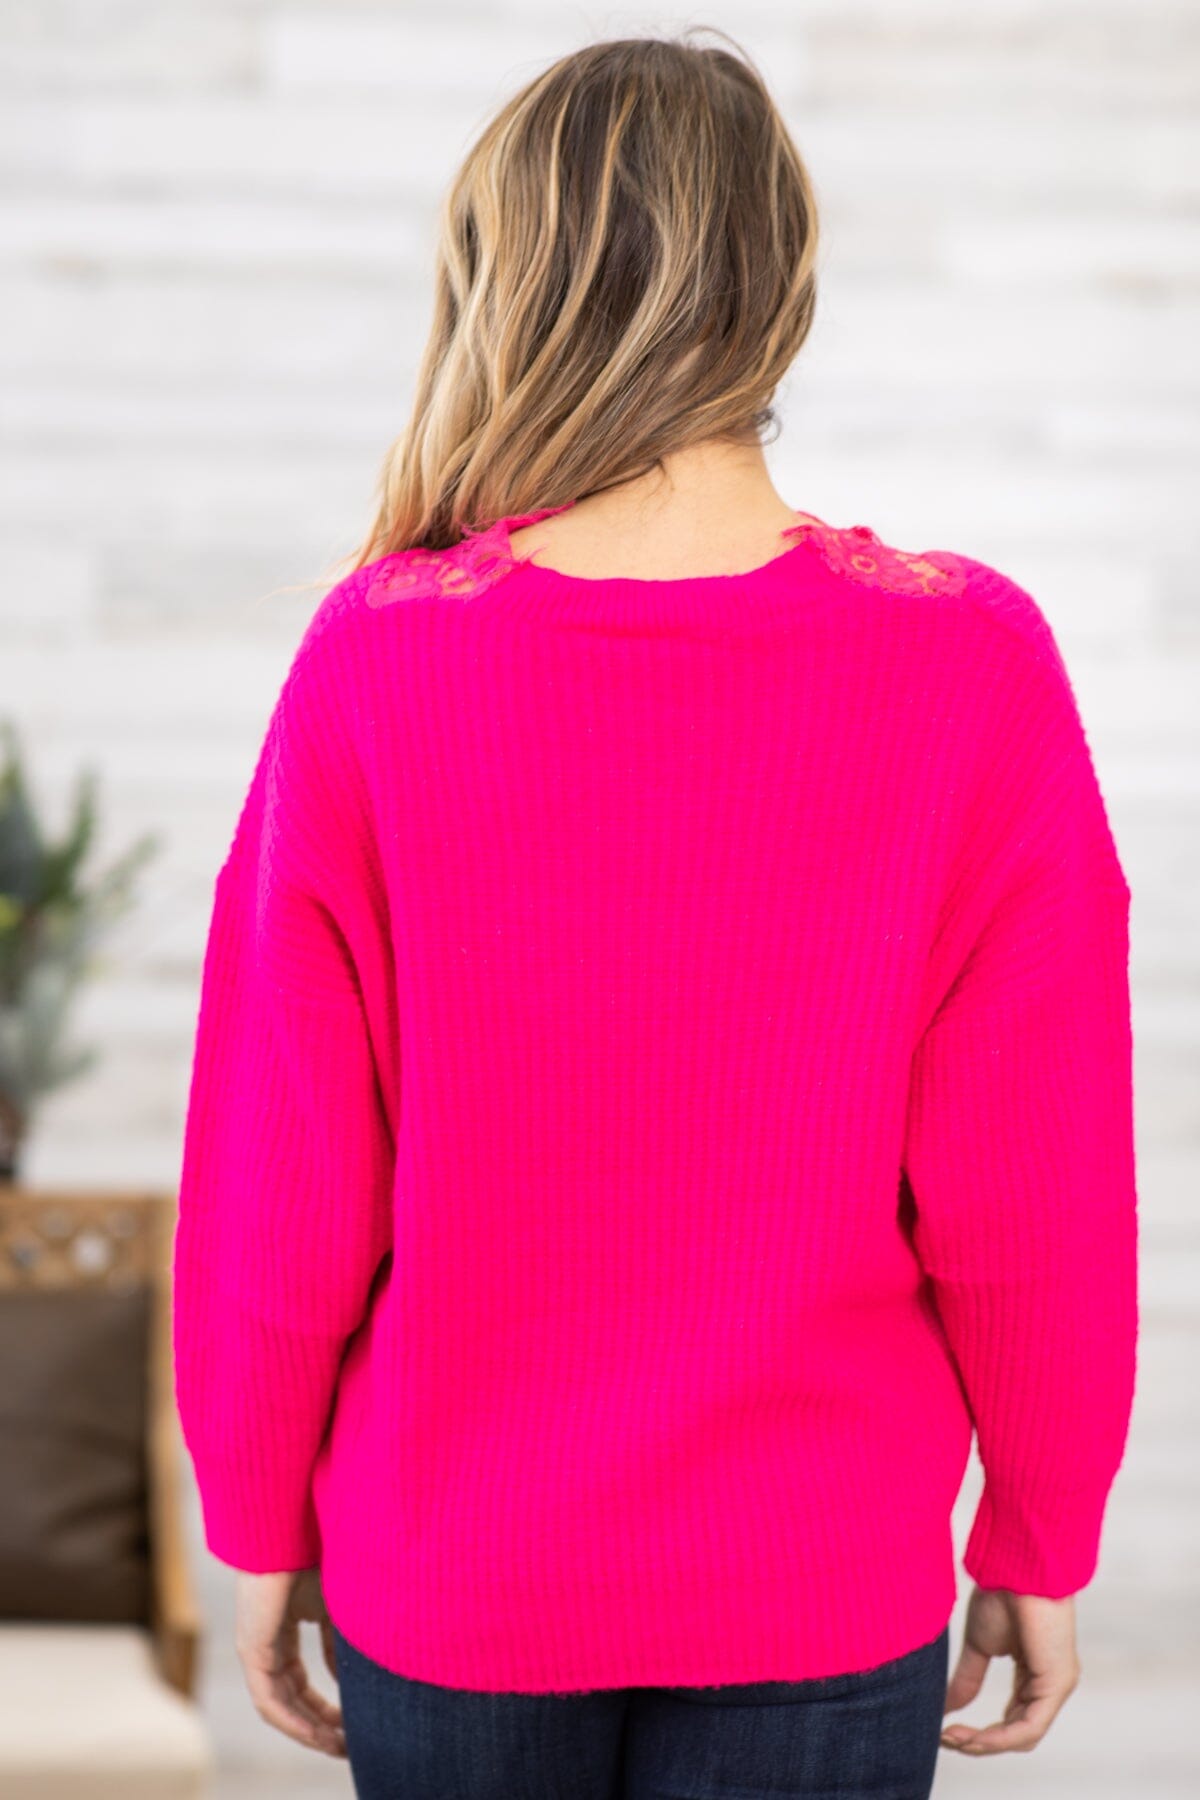 Hot Pink Lace Trim Rib Knit Sweater - Filly Flair